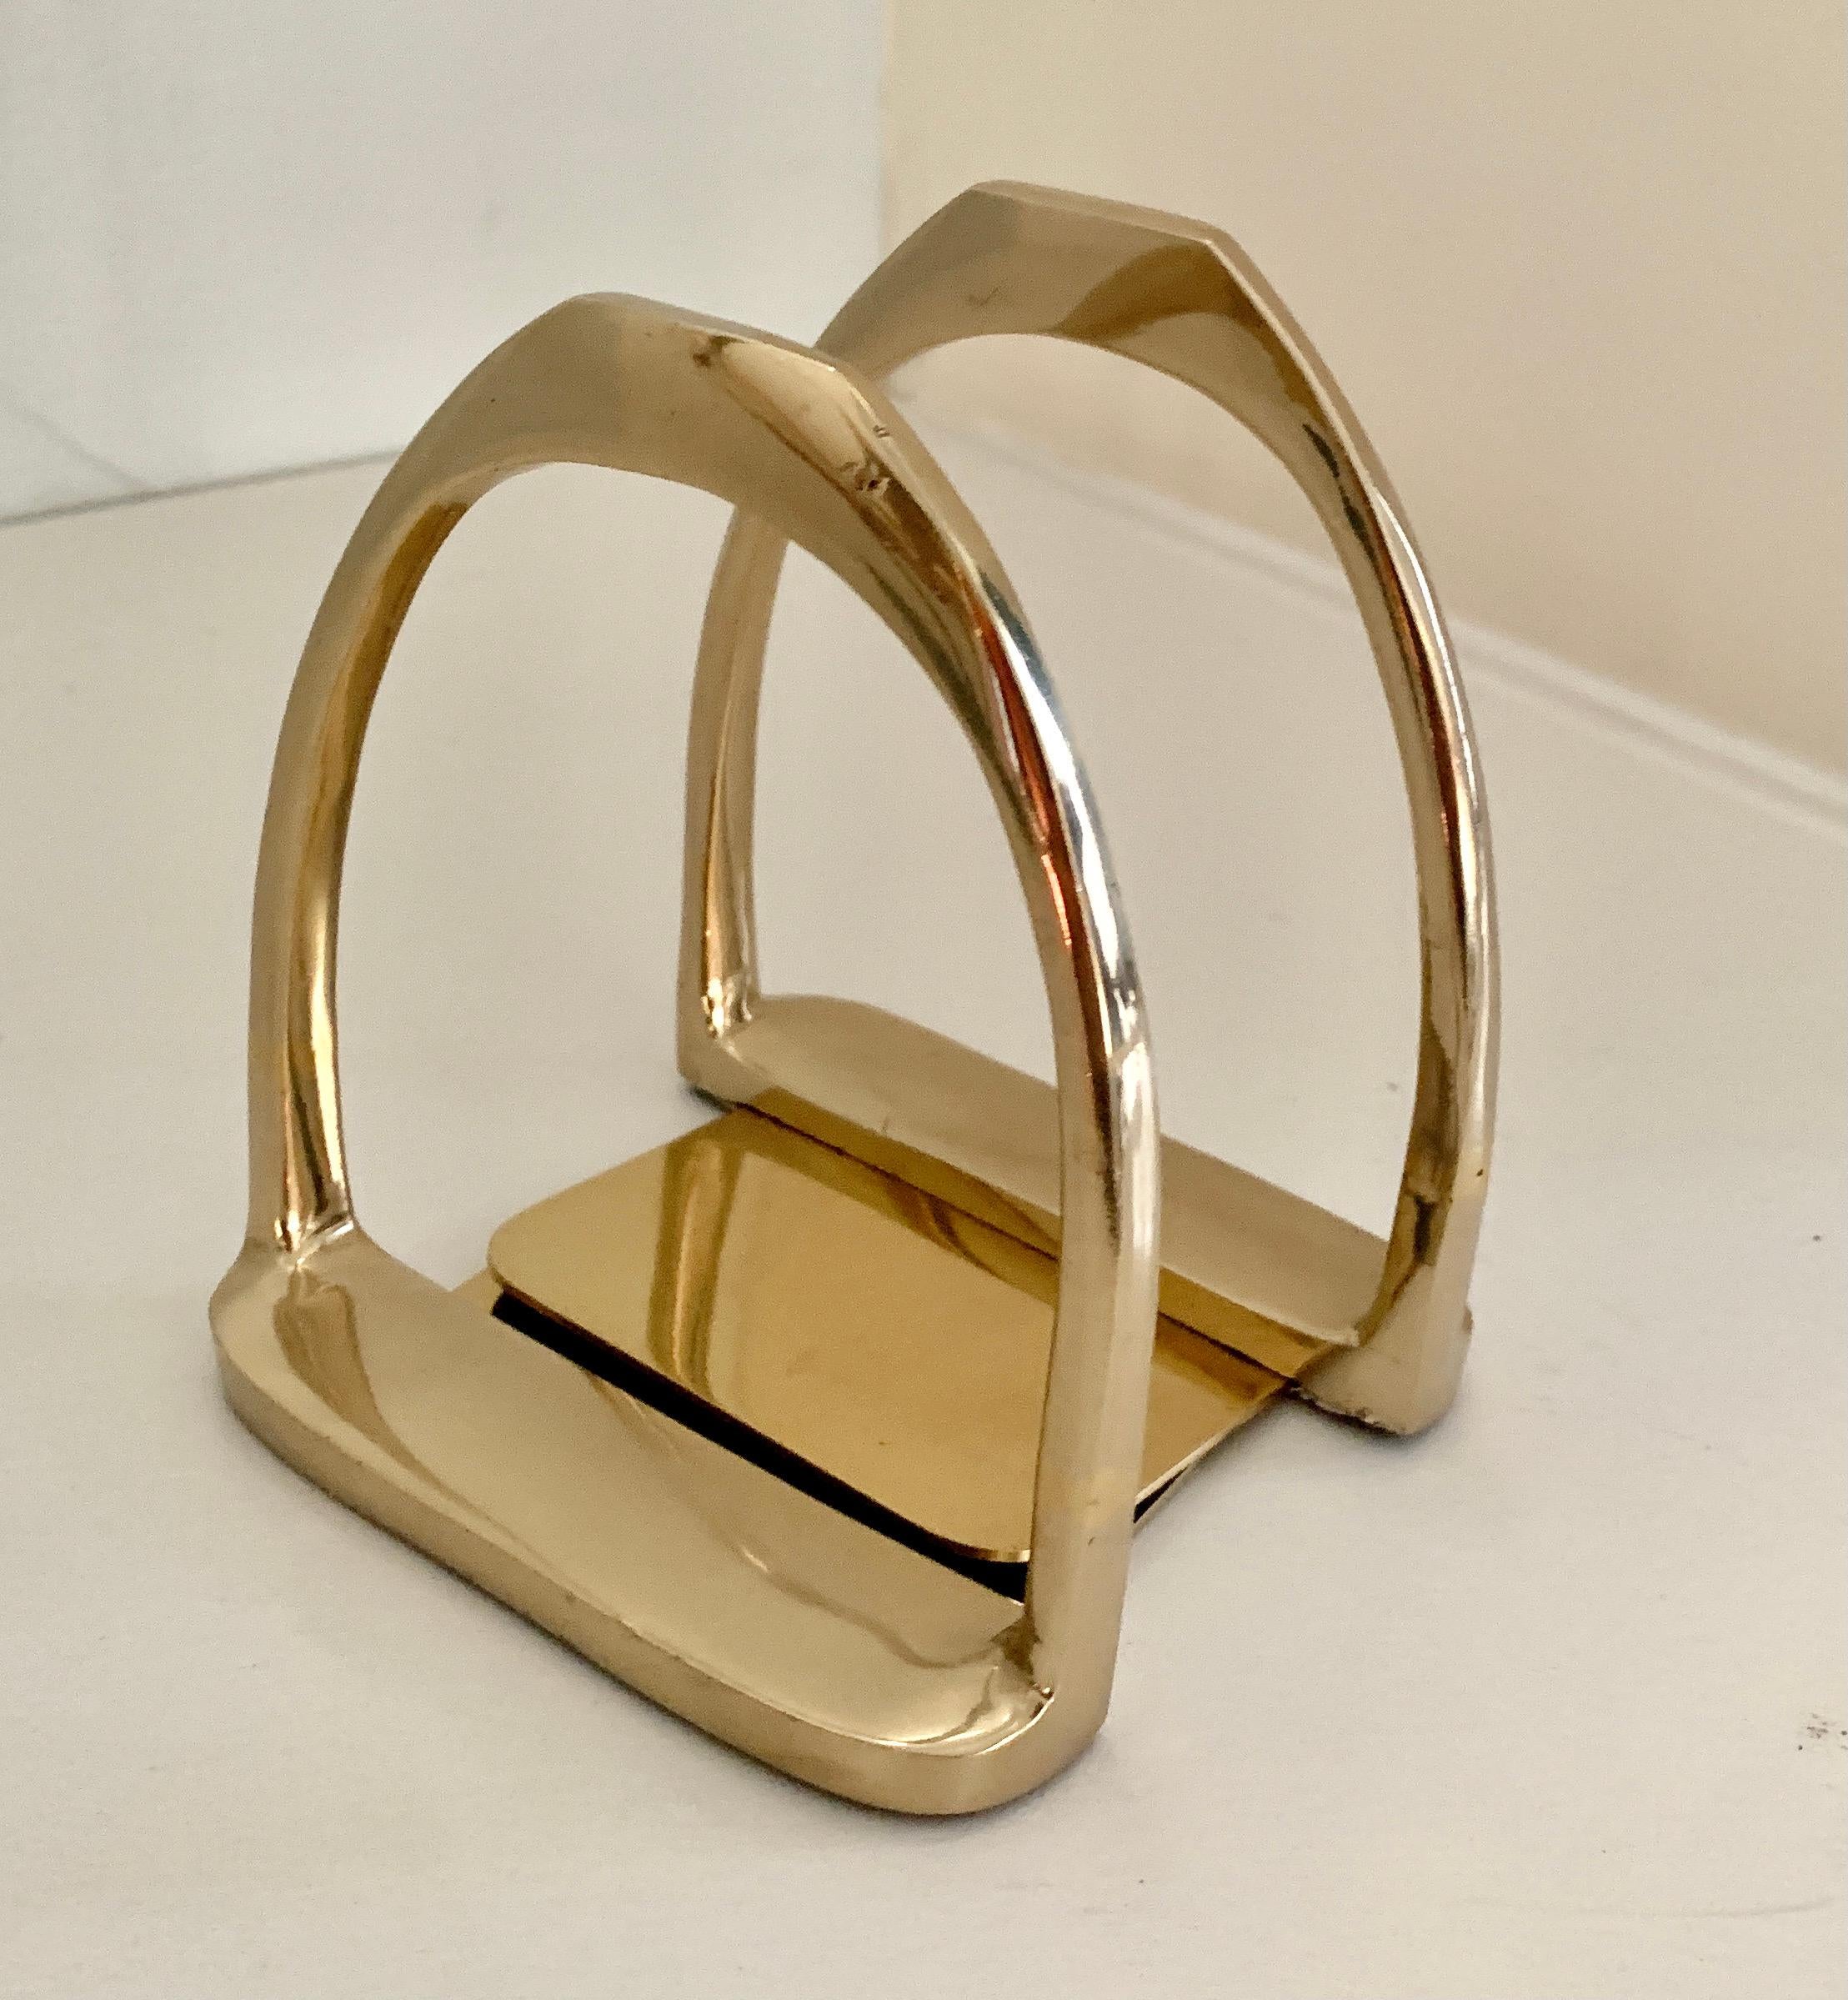 Pair of Brass Horse Bit Bookends in the Style of Gucci 1